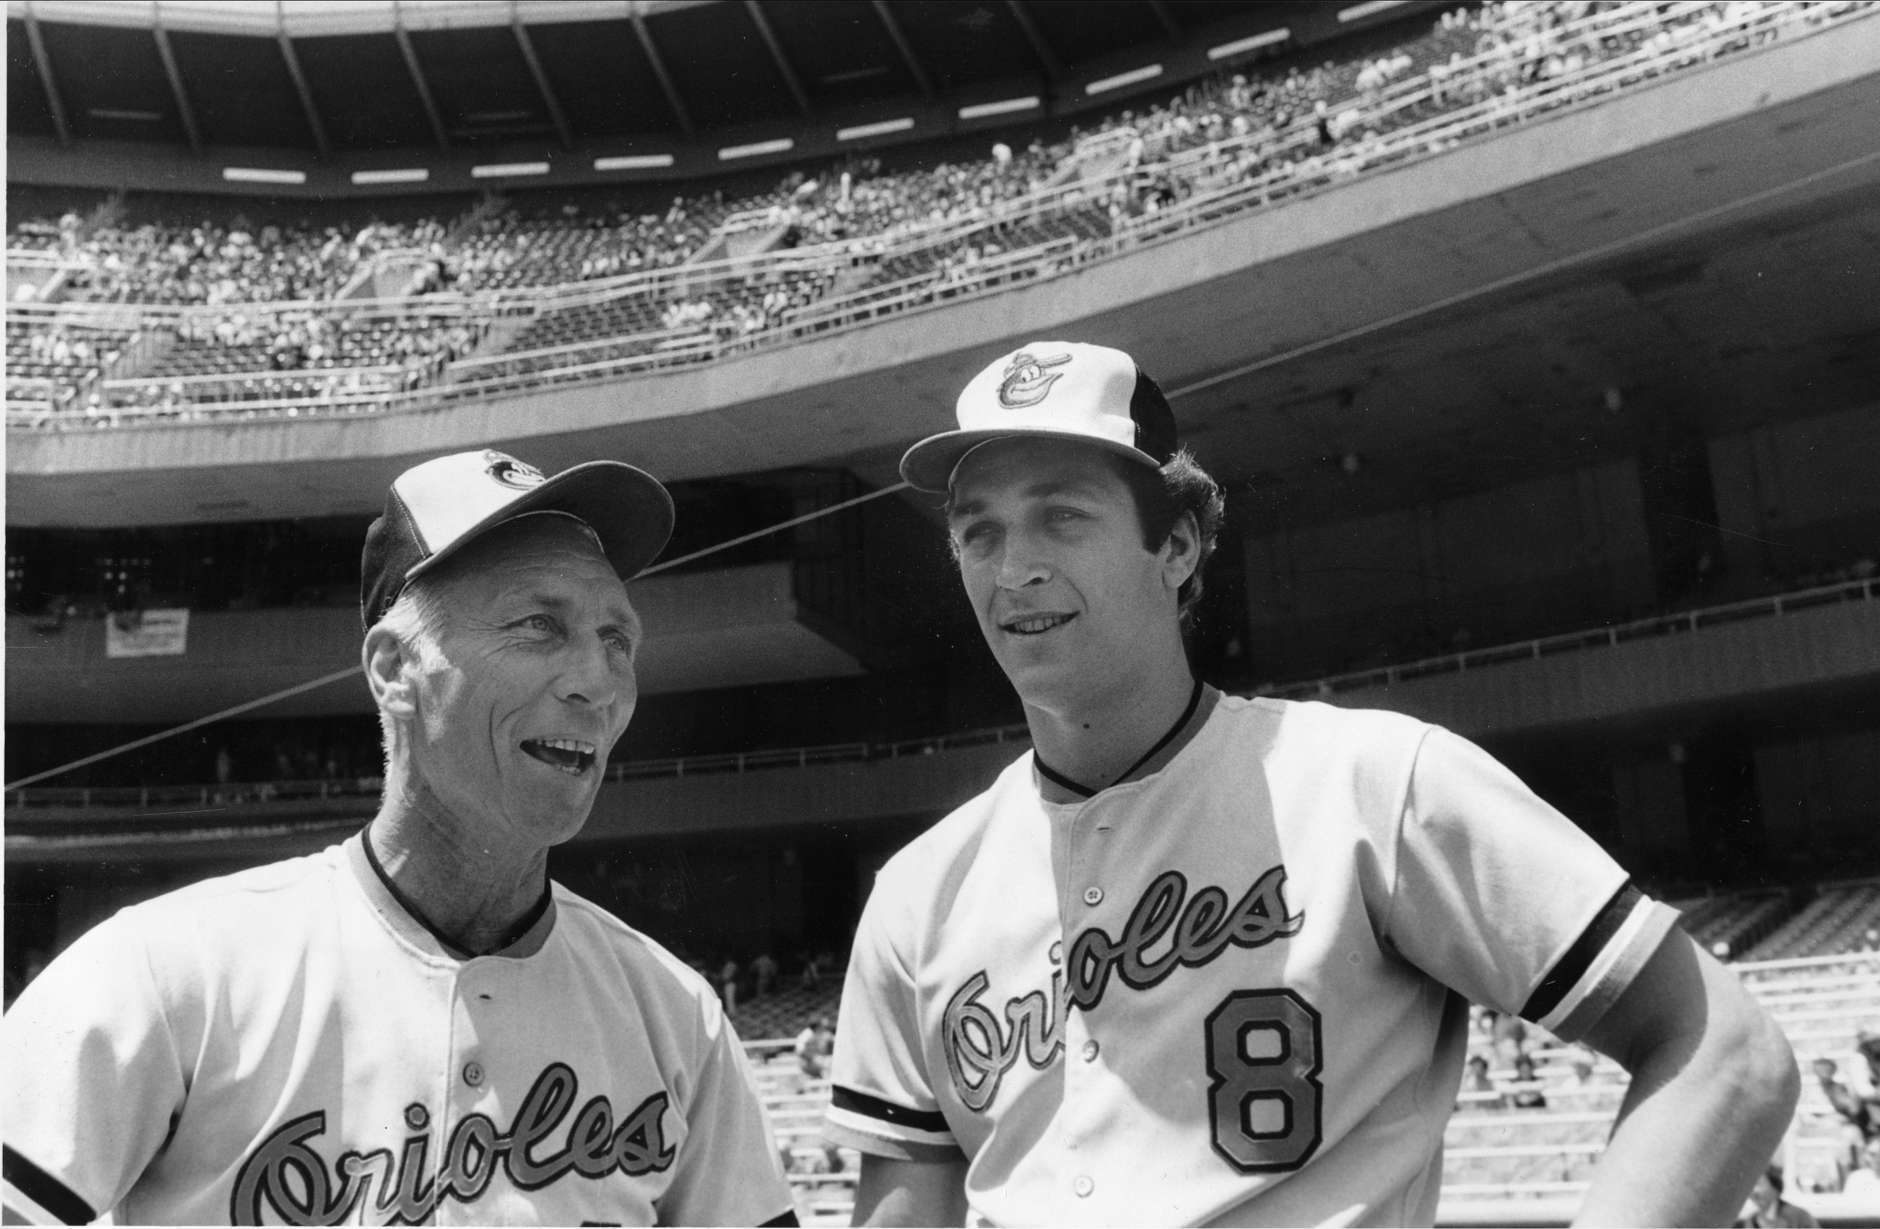 Baltimore Orioles pitching coach Cal Ripken Sr., left, gets a father's day greeting from his son Cal Jr. at Yankee Stadium in the Bronx, N.Y., Sunday, June 20, 1982.  Cal Jr. is an infielder with the Orioles.  (AP Photo/Harry Harris)